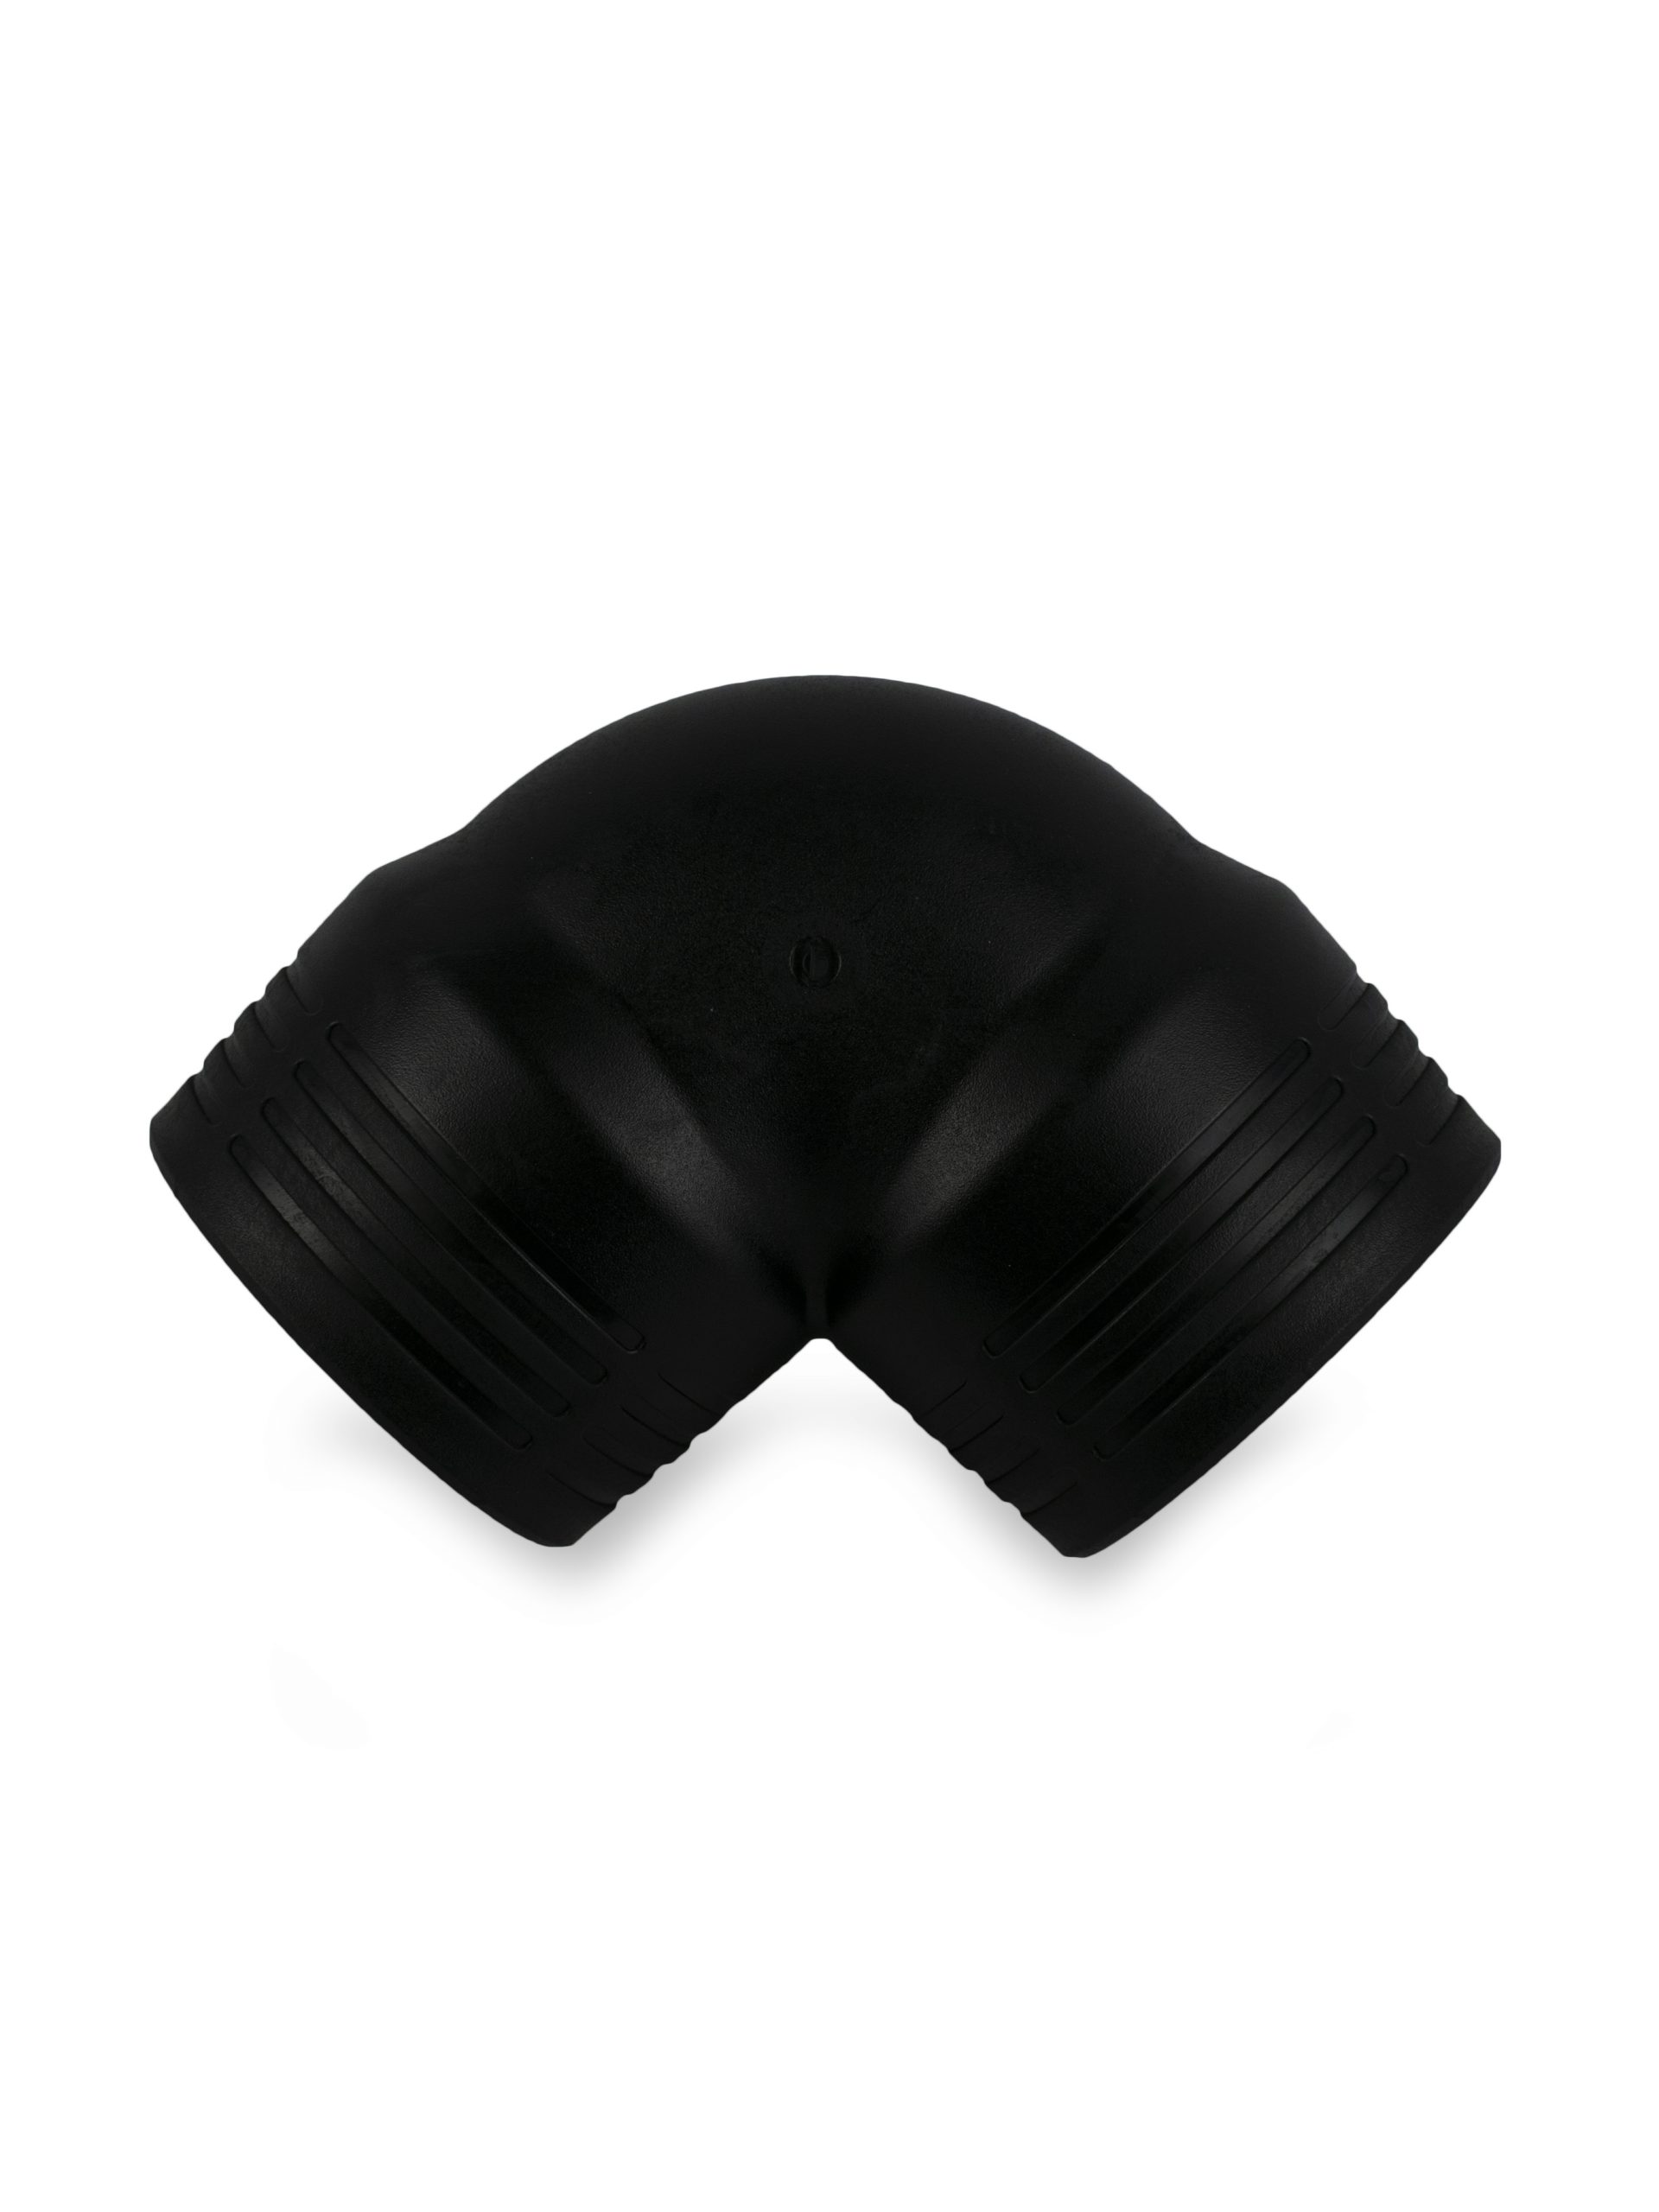 ELBOW 32MM HDPE